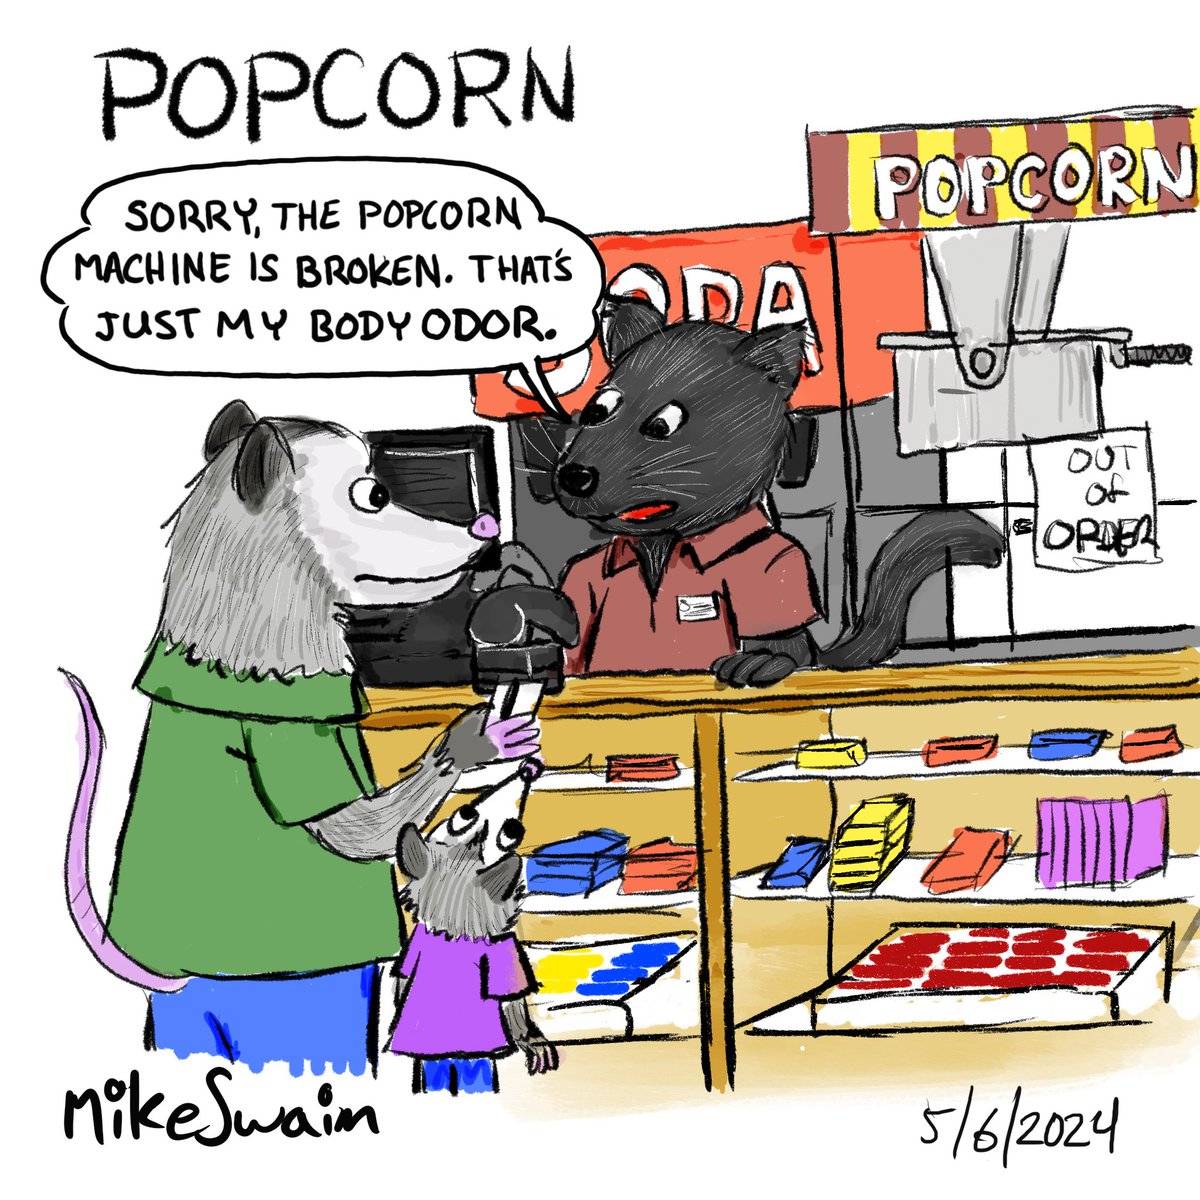 P is for popcorn for this week’s #AnimalAlphabets This week I chose a Binturong a Southeast Asian animal with an odor that smells like hot buttered popcorn. @AnimalAlphabets Reposted to correct an error. #Binturong #possum #movie #popcorn #comic #draw #illustration